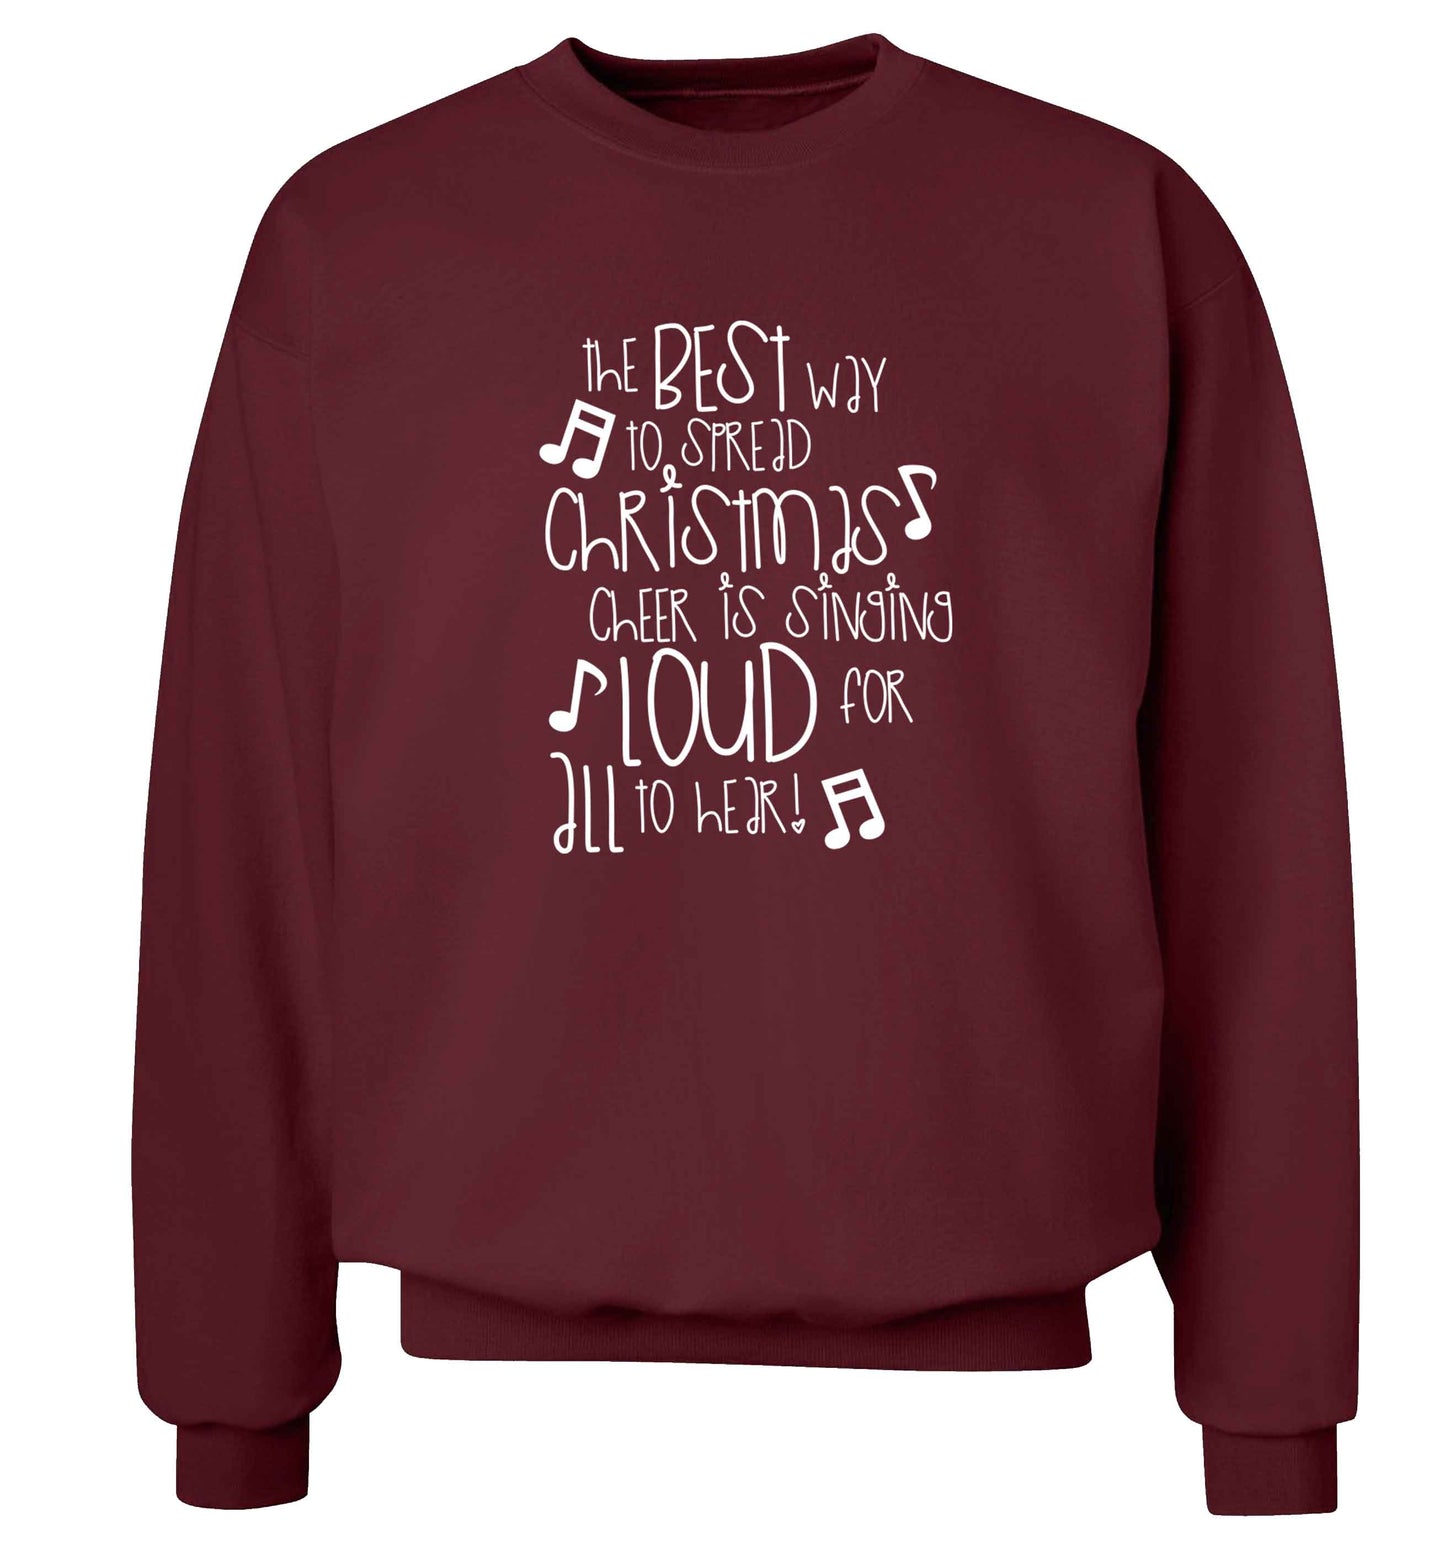 The best way to spread Christmas cheer is singing loud for all to hear adult's unisex maroon sweater 2XL